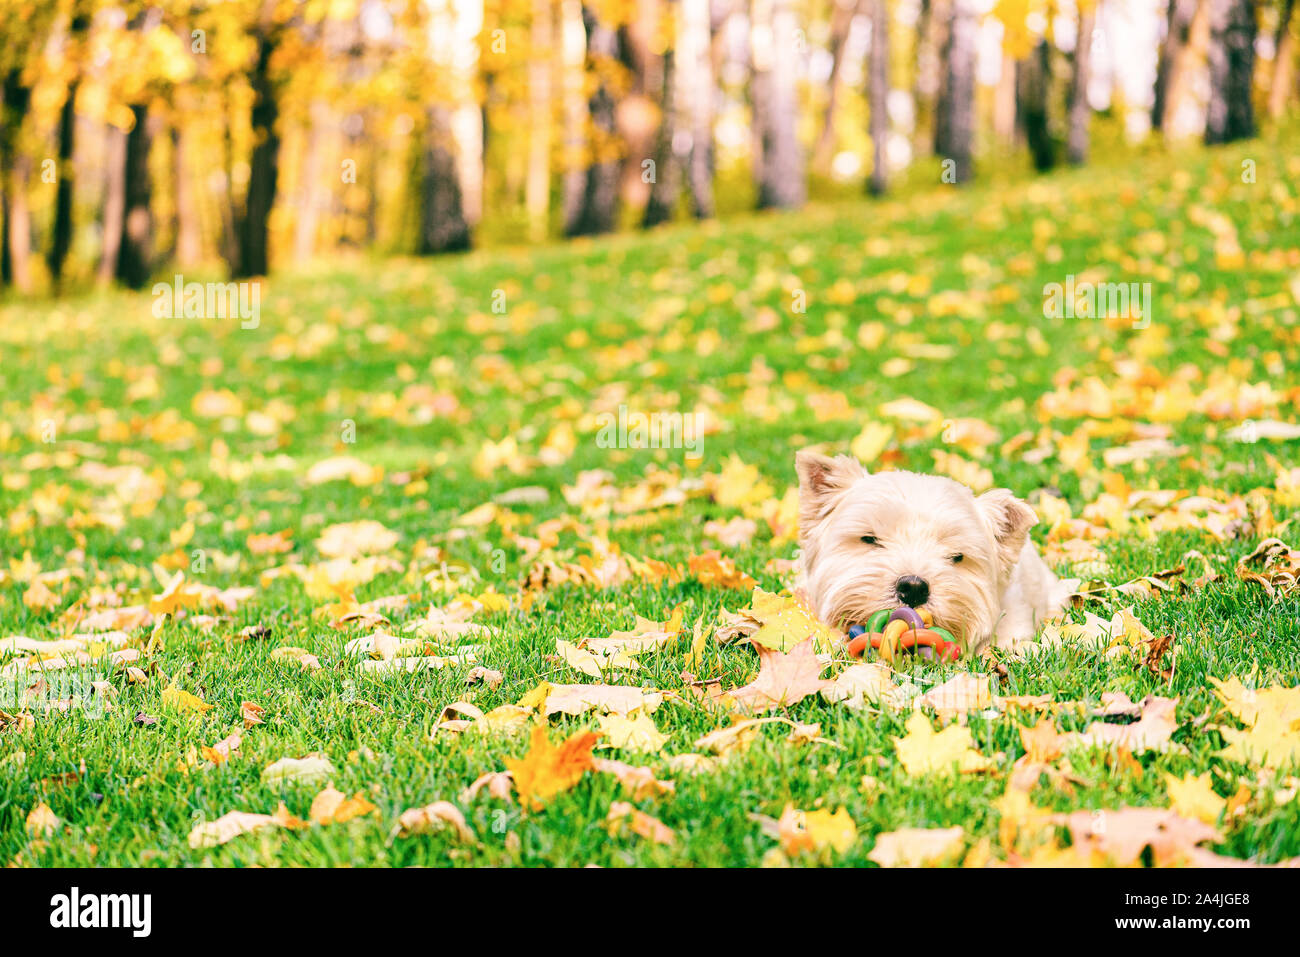 Cute dog playing with colorful toy ball at fall (autumn) lawn Stock Photo